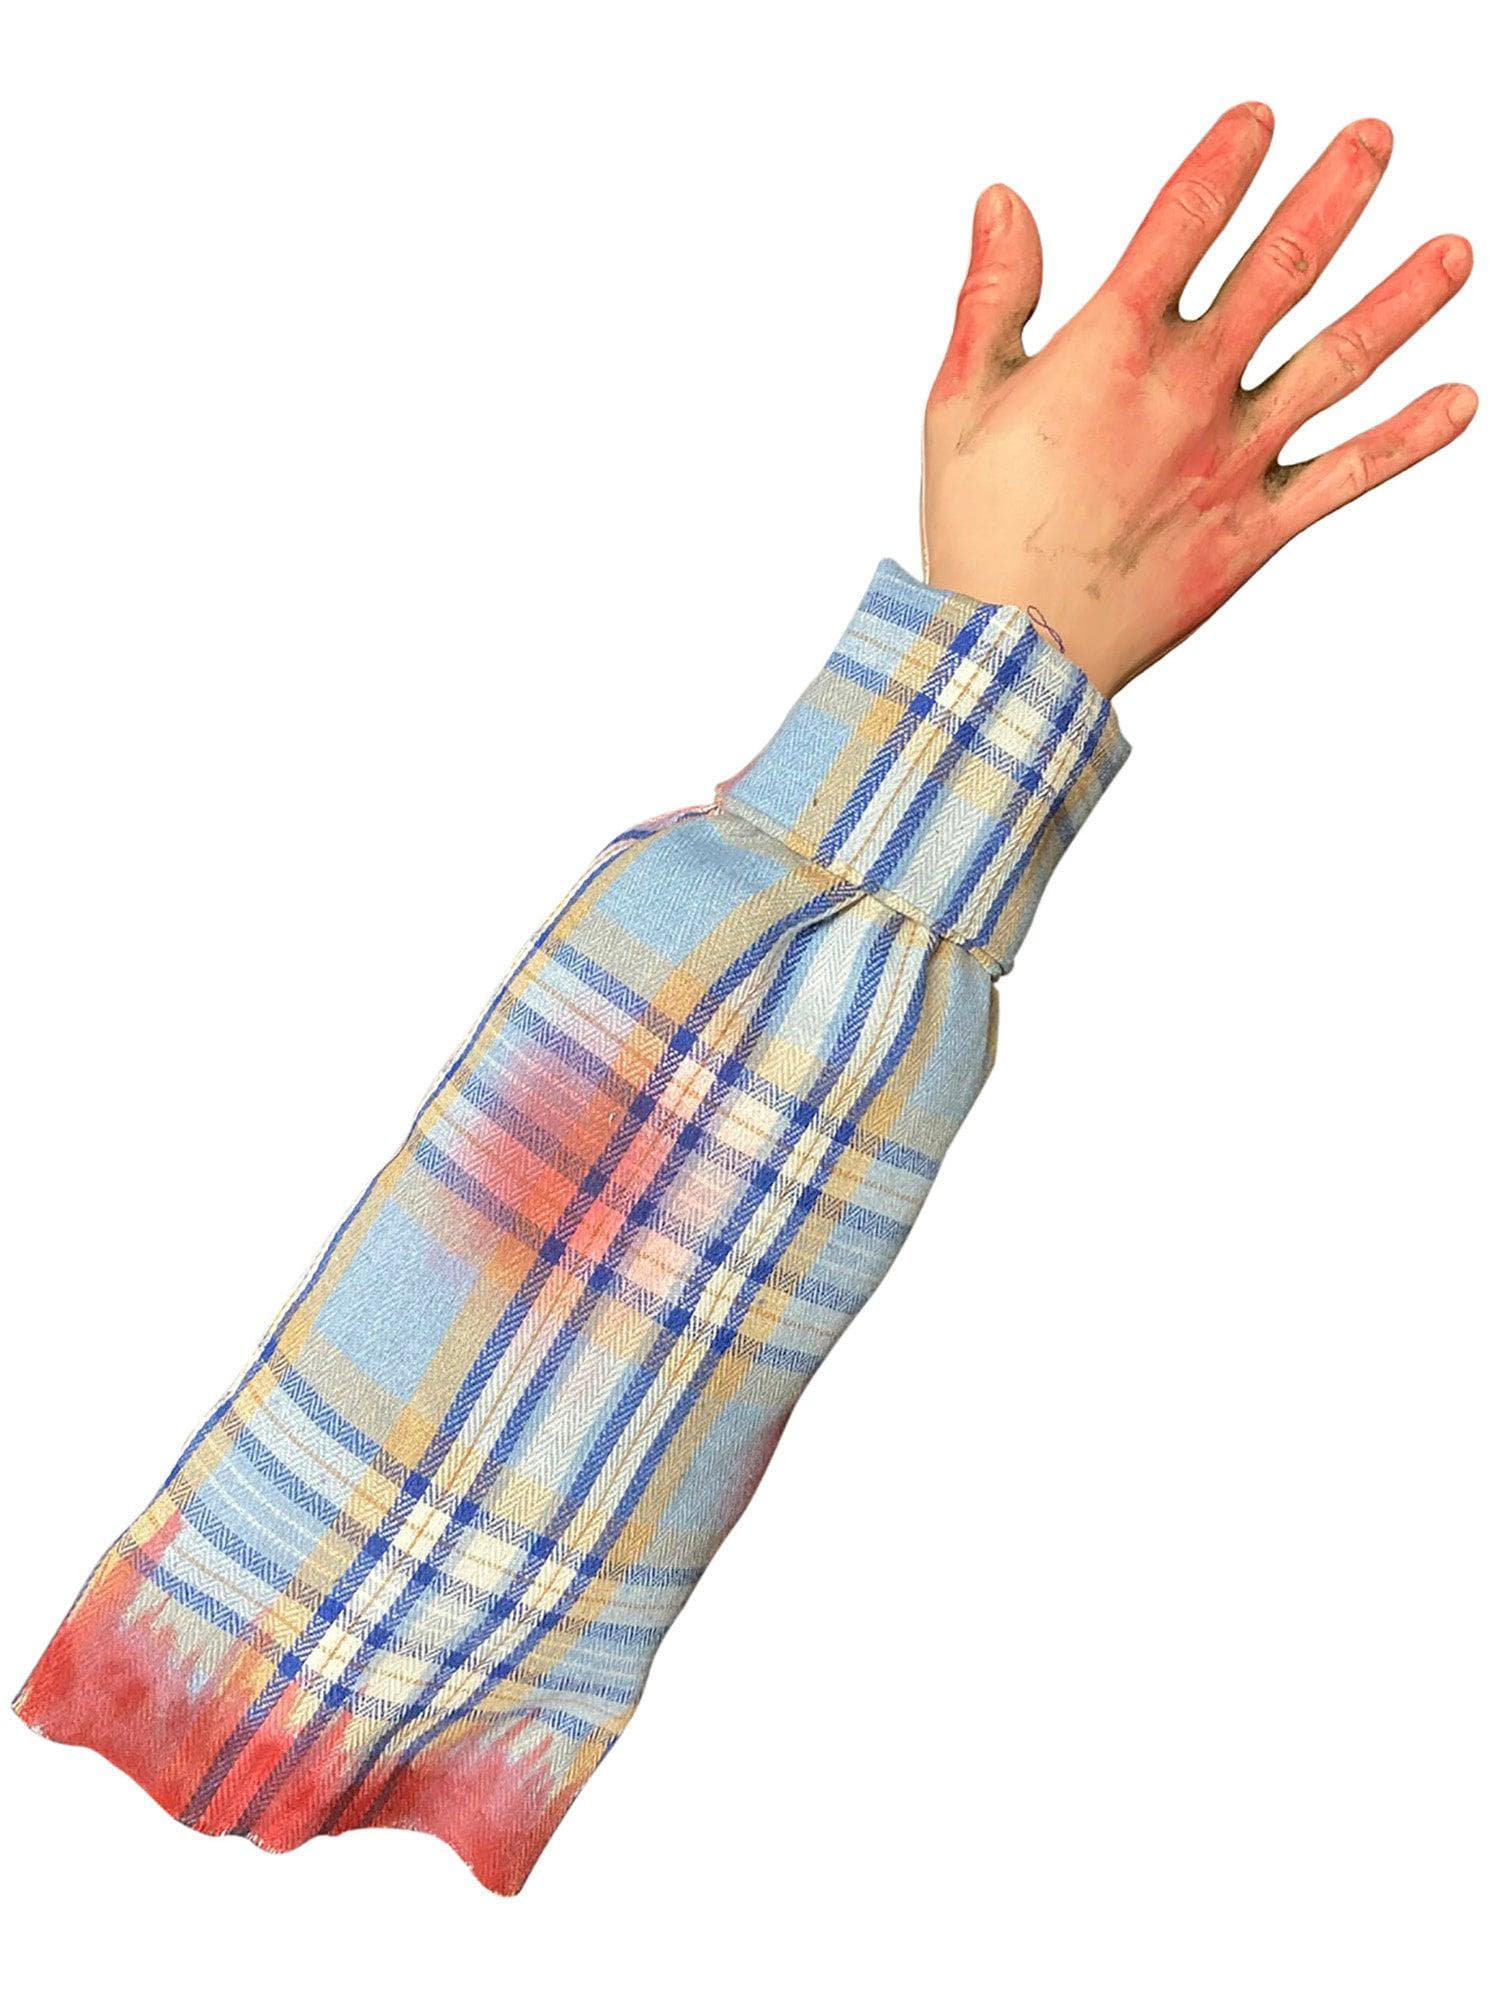 17 Inch Severed Arm Animated Prop - costumes.com